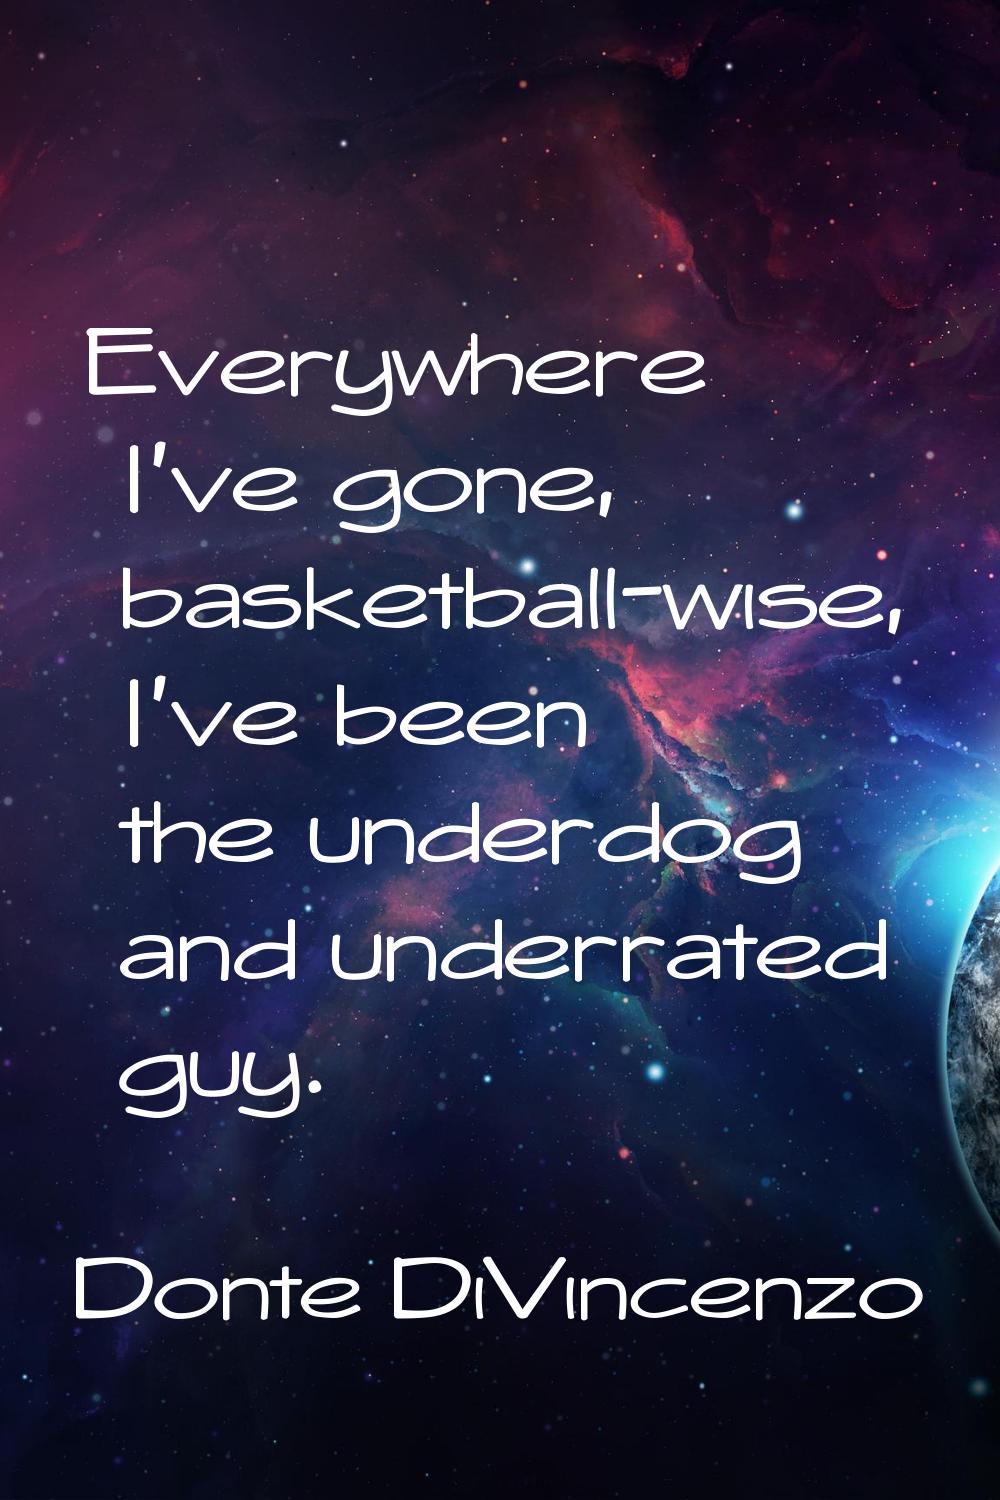 Everywhere I've gone, basketball-wise, I've been the underdog and underrated guy.